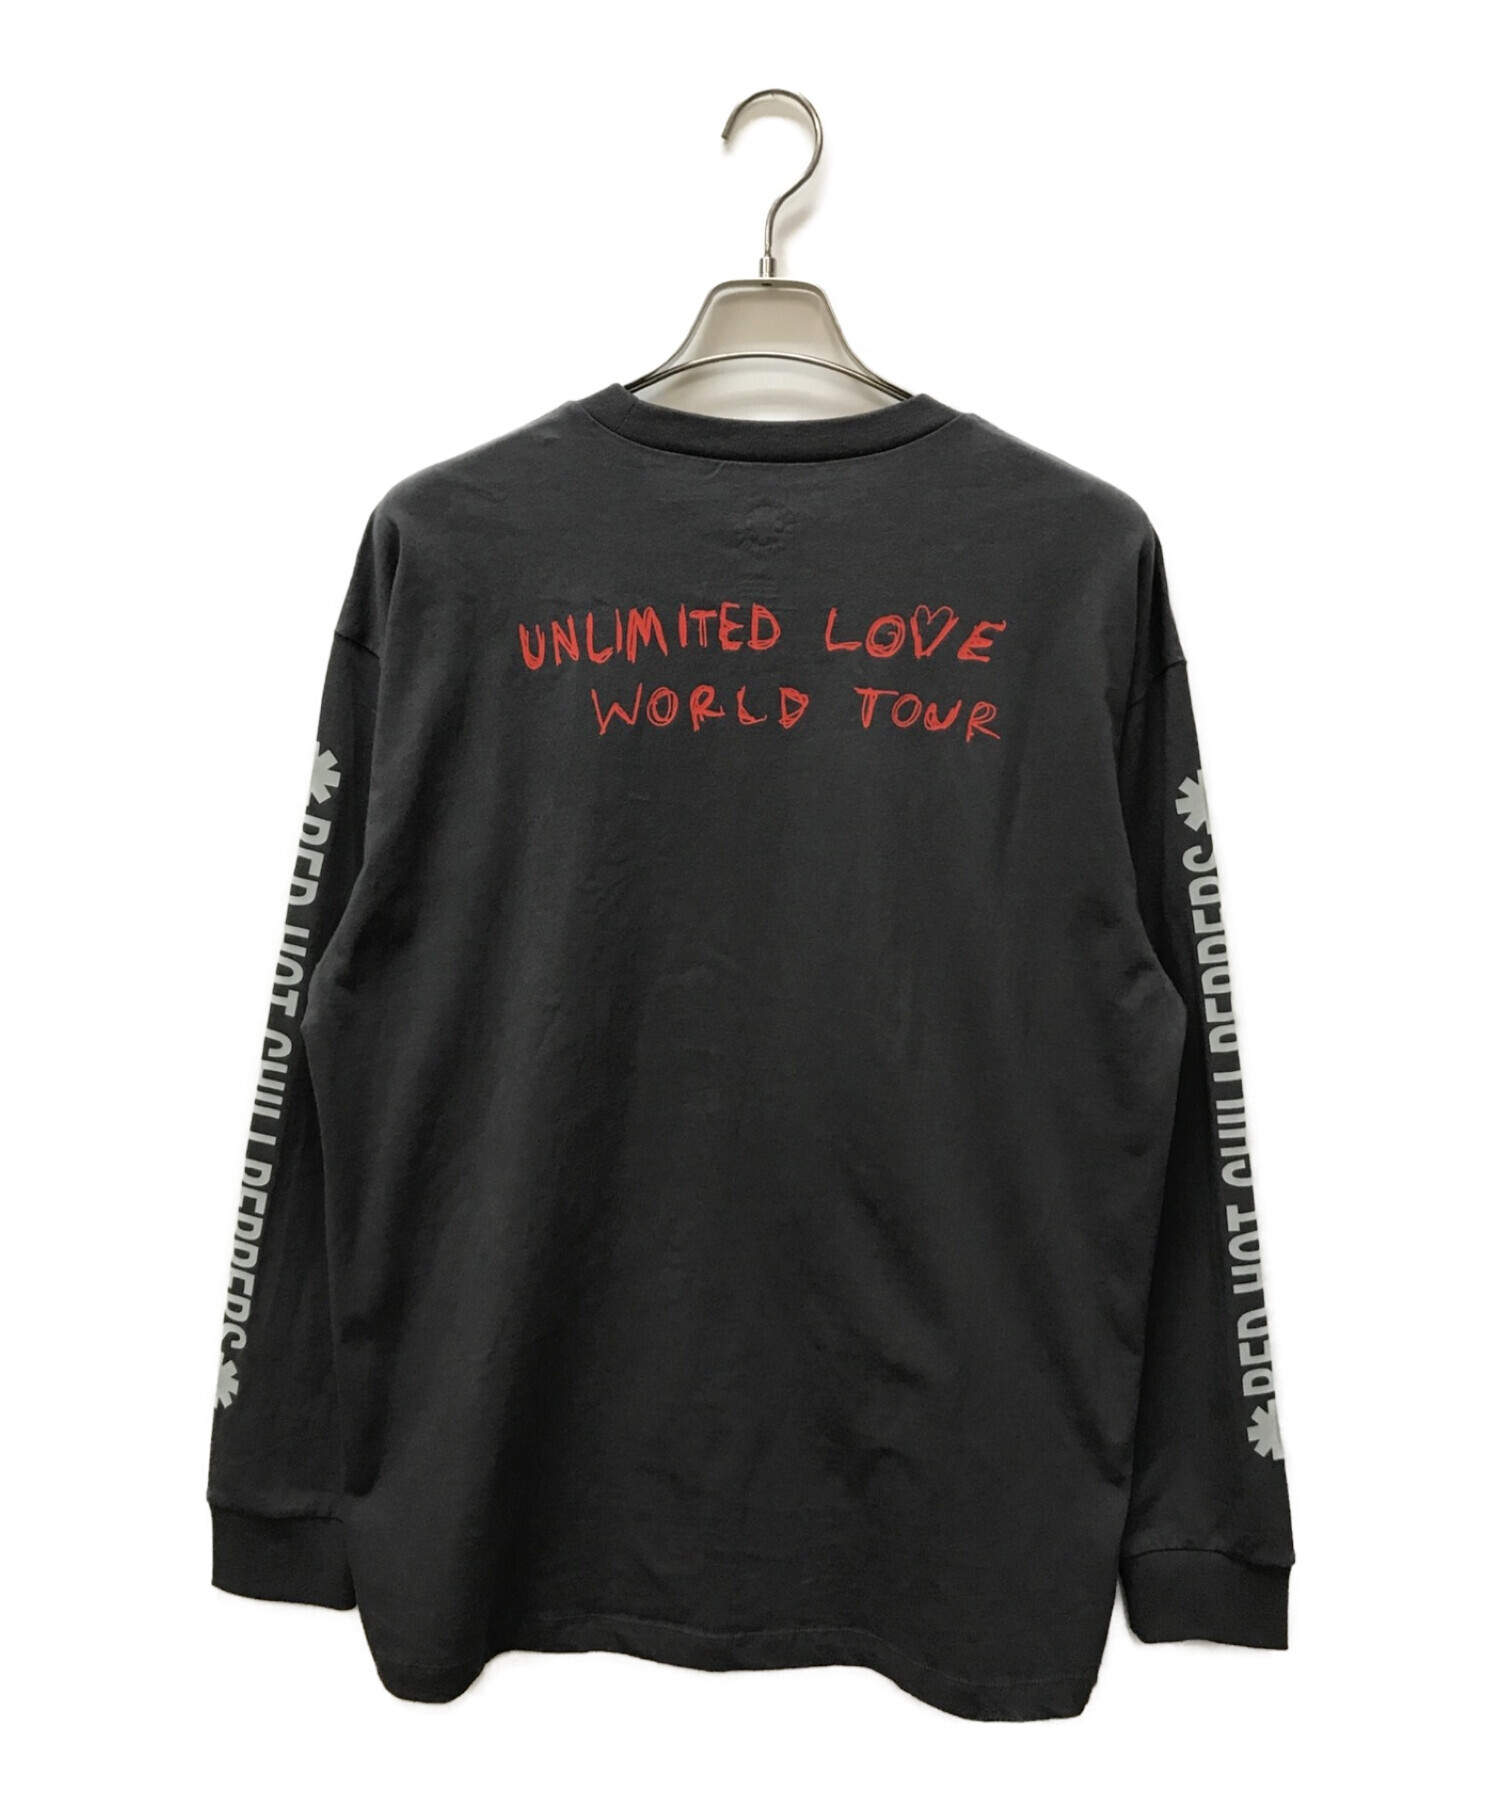 RED HOT CHILI PEPPERS (レッドホットチリペッパーズ) 2023 LIMITED LOVE TOUR/ロングスリーブツアーTシャツ  グレー サイズ:M